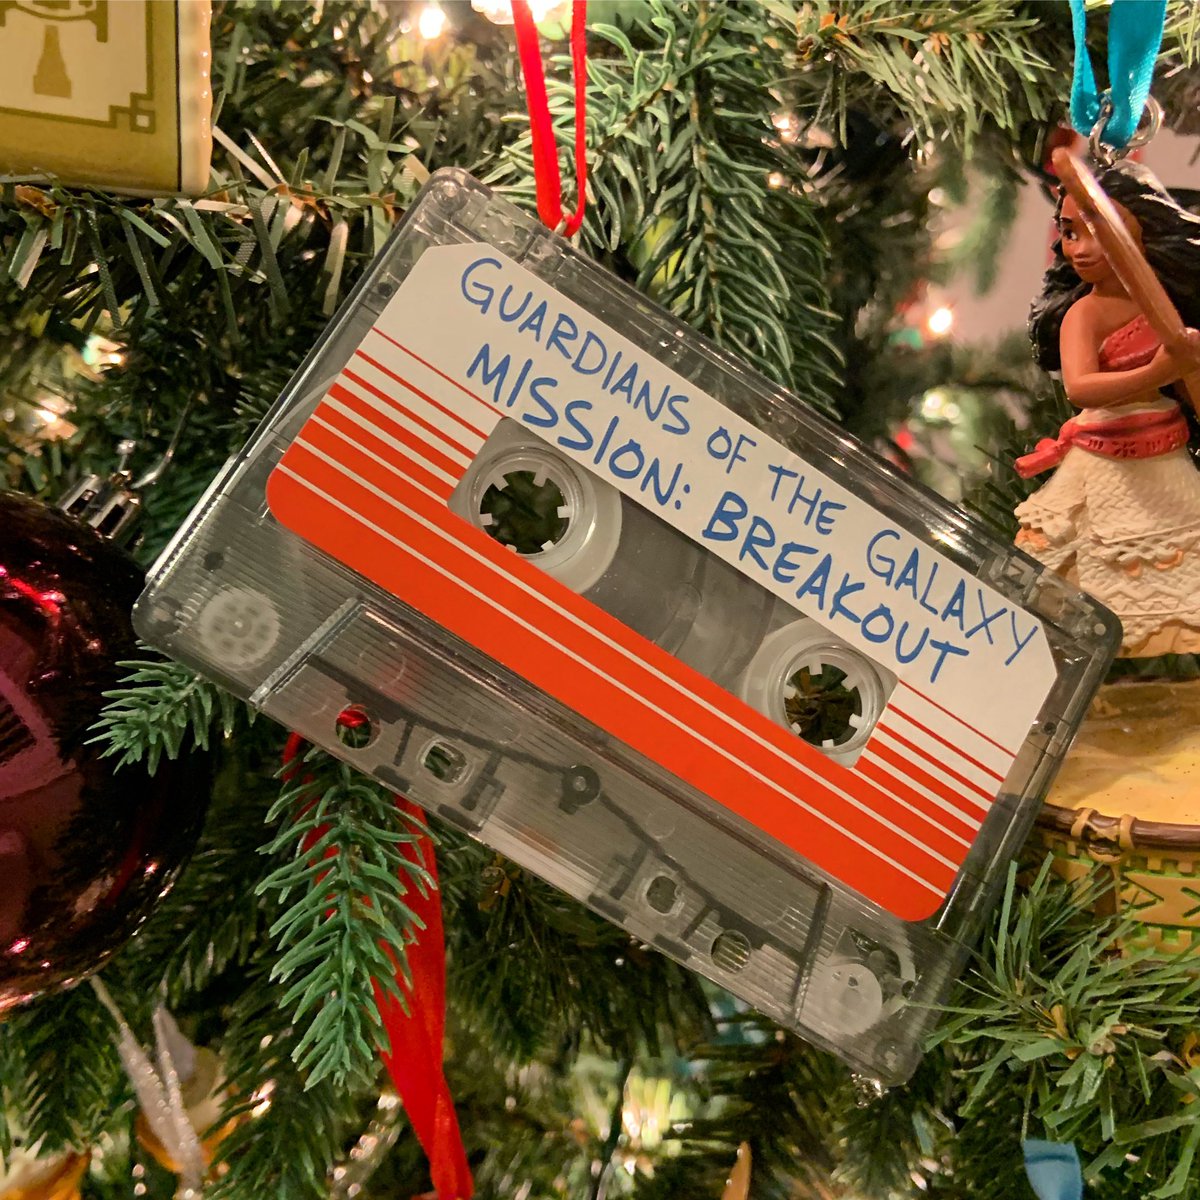 December 18th... one week to go. How about an awesome mix? #ornamentoftheday